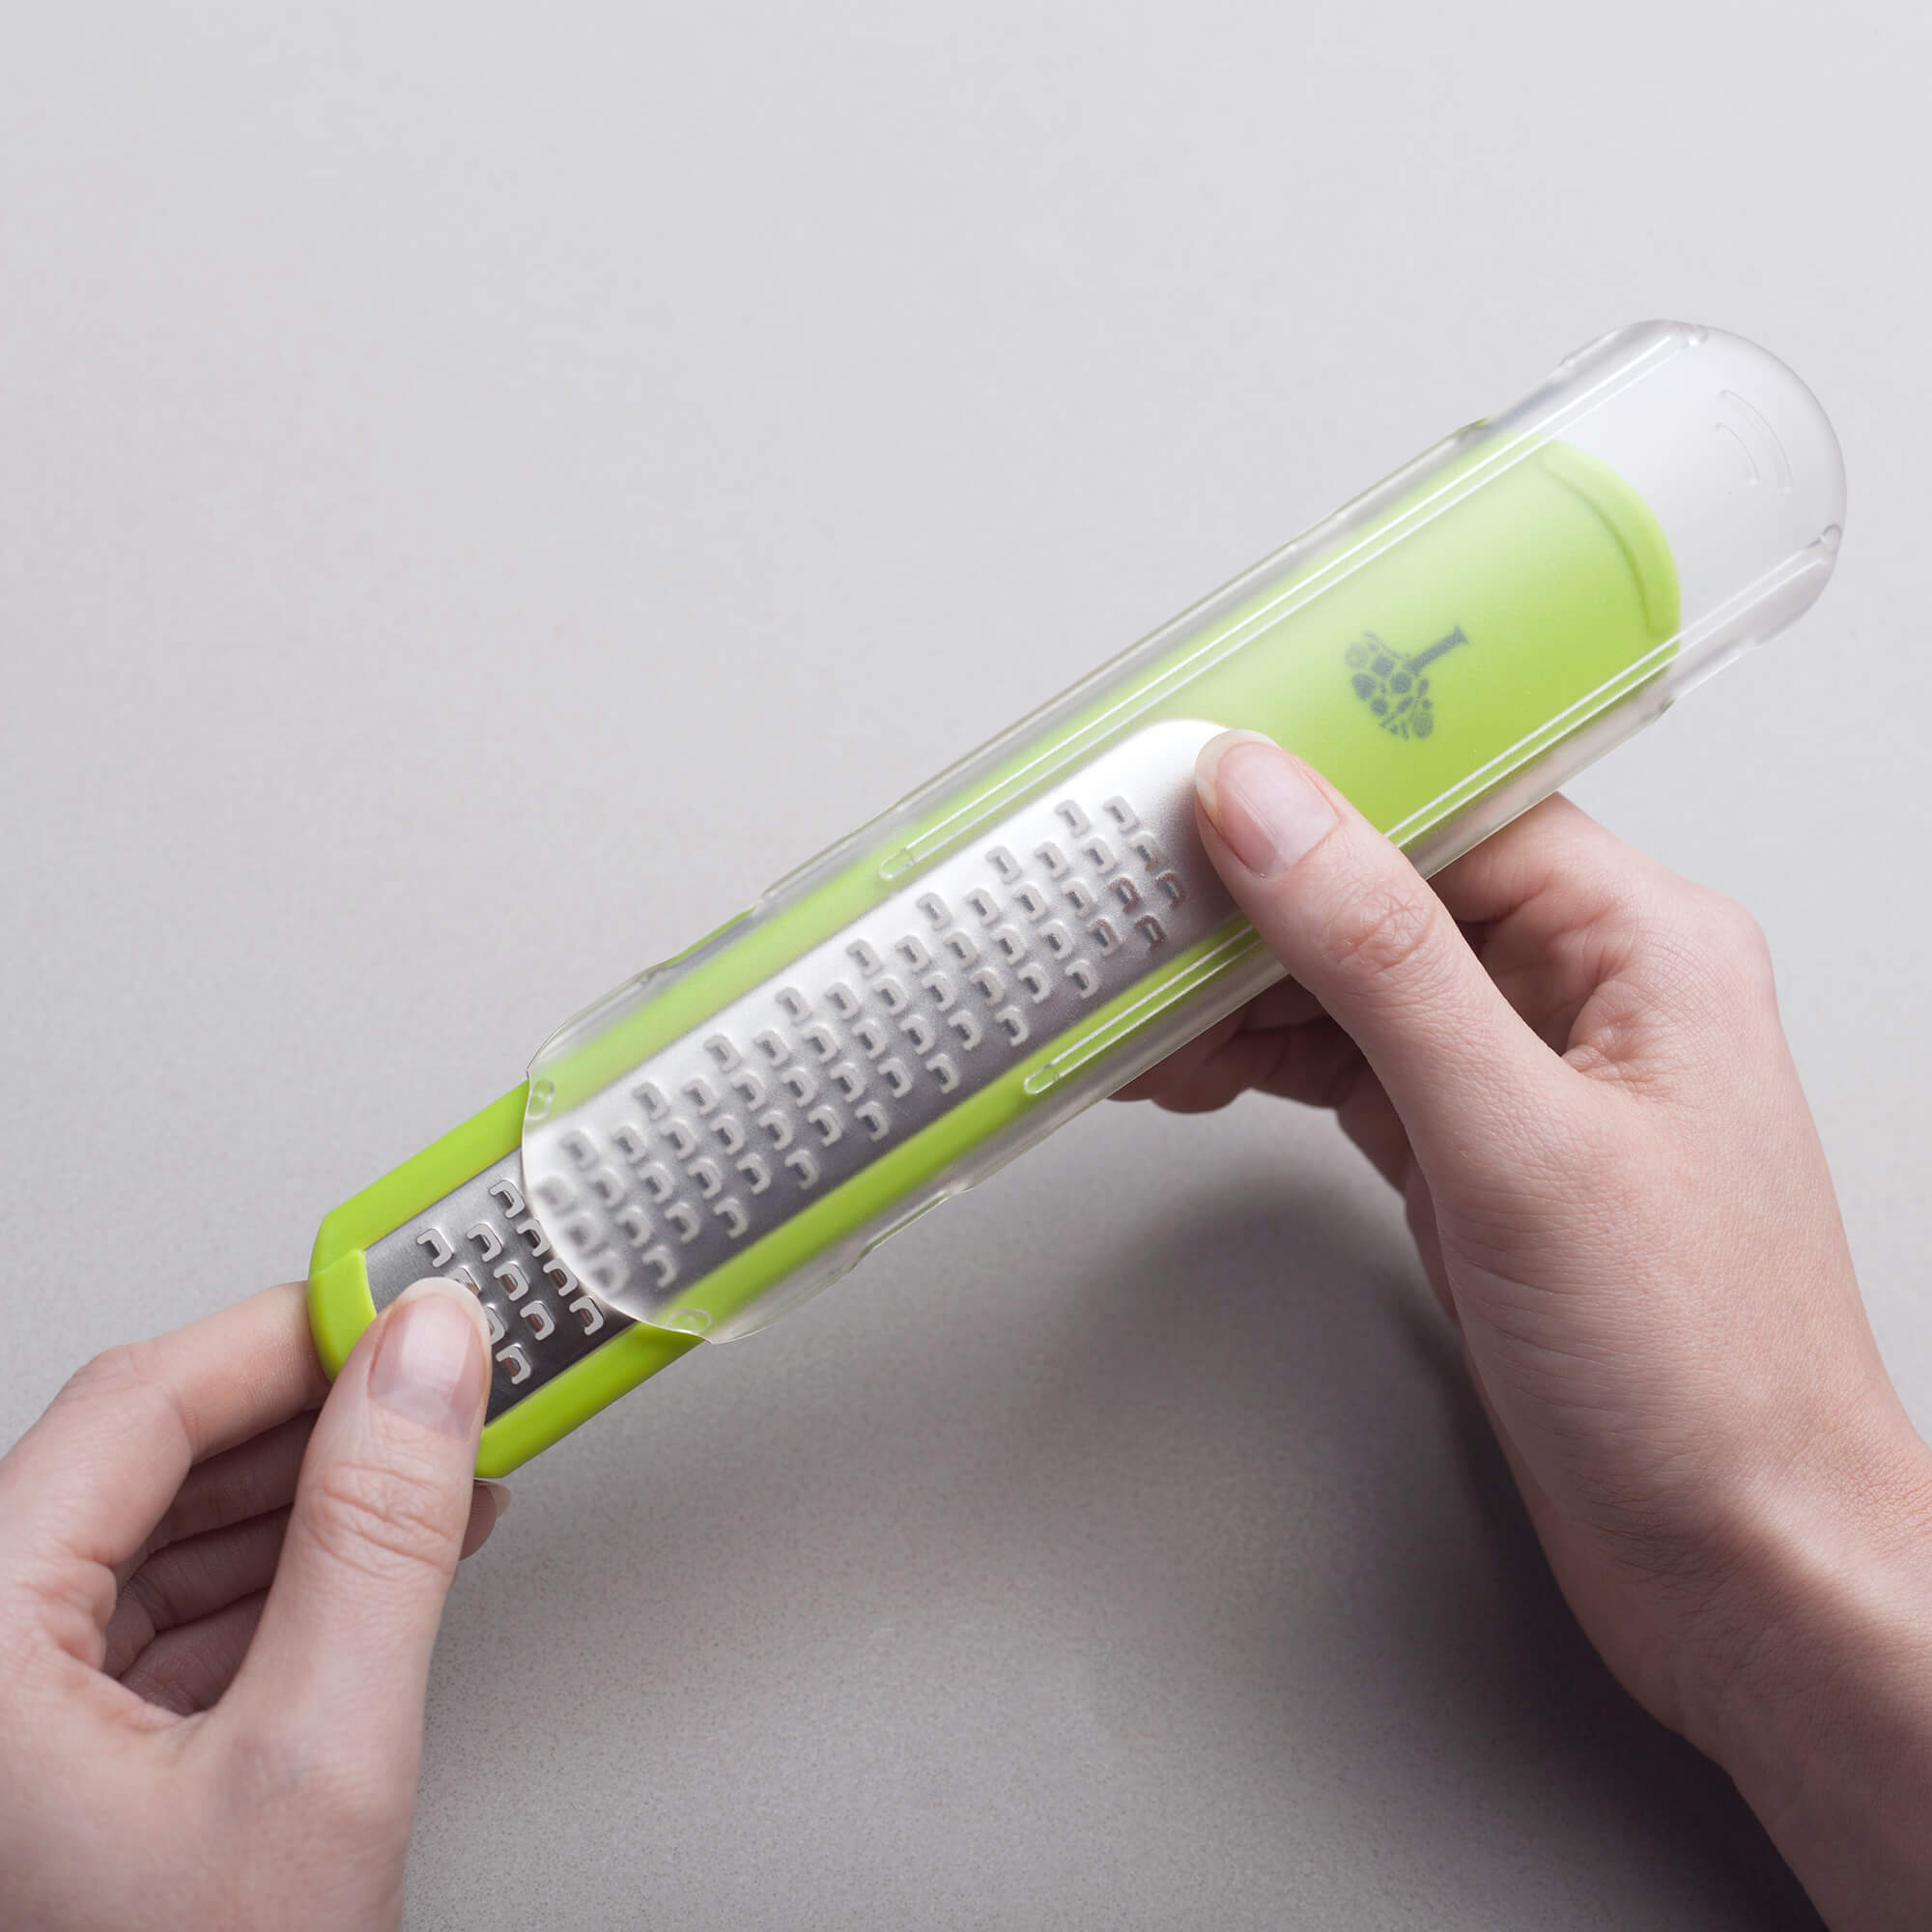 Zeal Parmesan Grater with protective blade cover